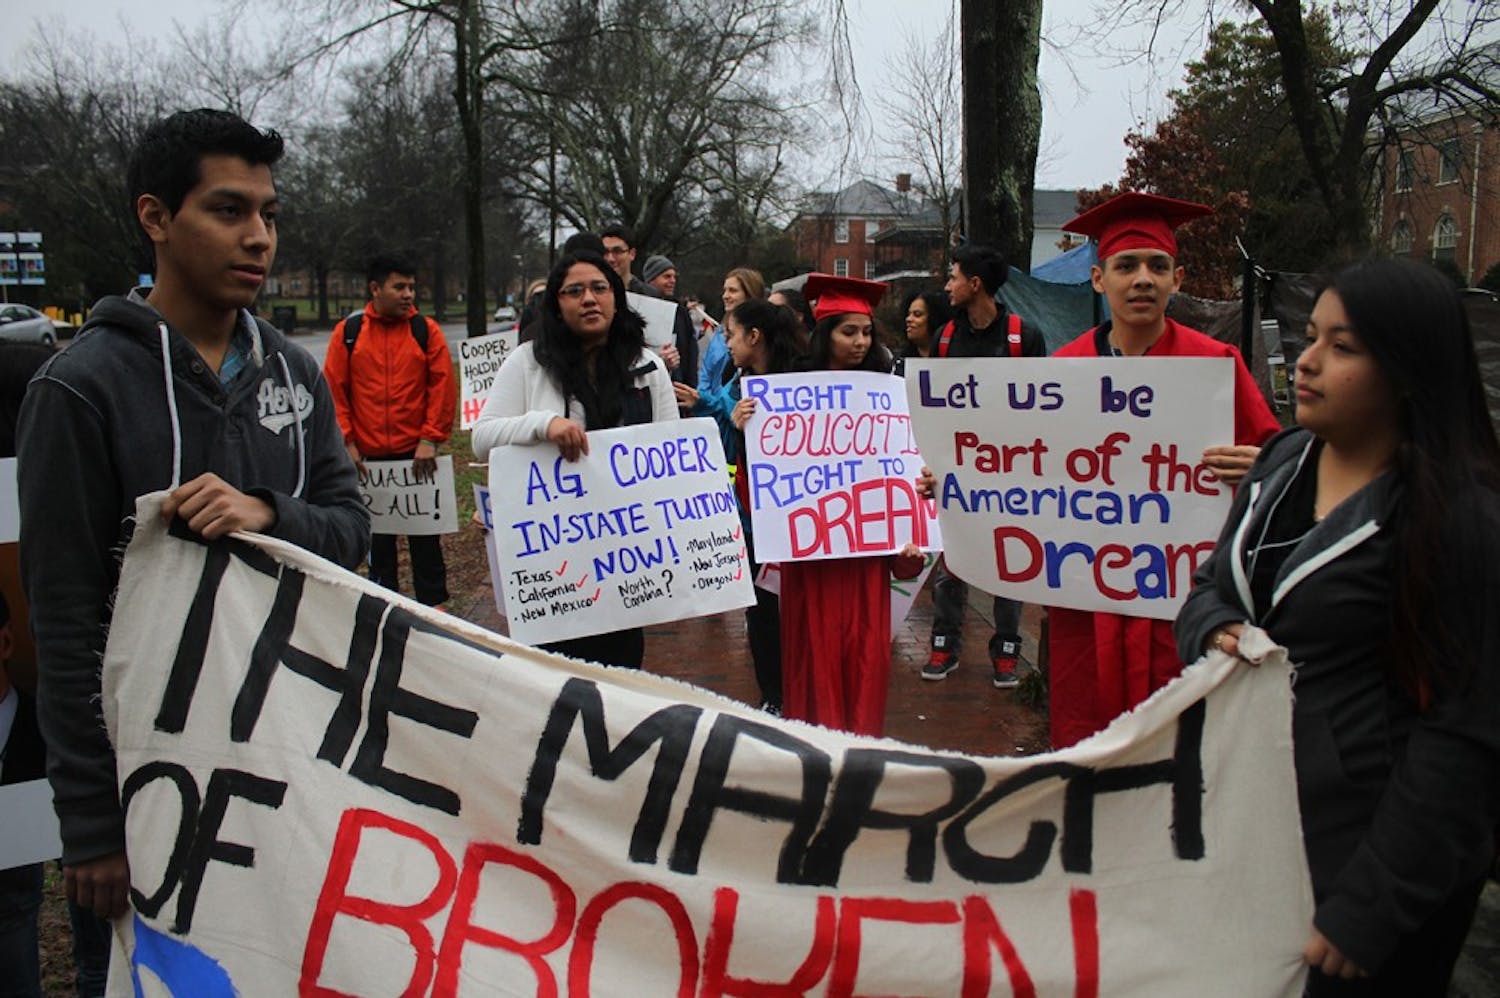 Protesters gathered on Franklin Street for the March of Broken Dreams, the starting point of an 8 hour trek to Raleigh, NC.  The demonstration took place in an effort to bring light to the law that prevents children who were brought to the United States illegally from receiving in-state tuition in college.